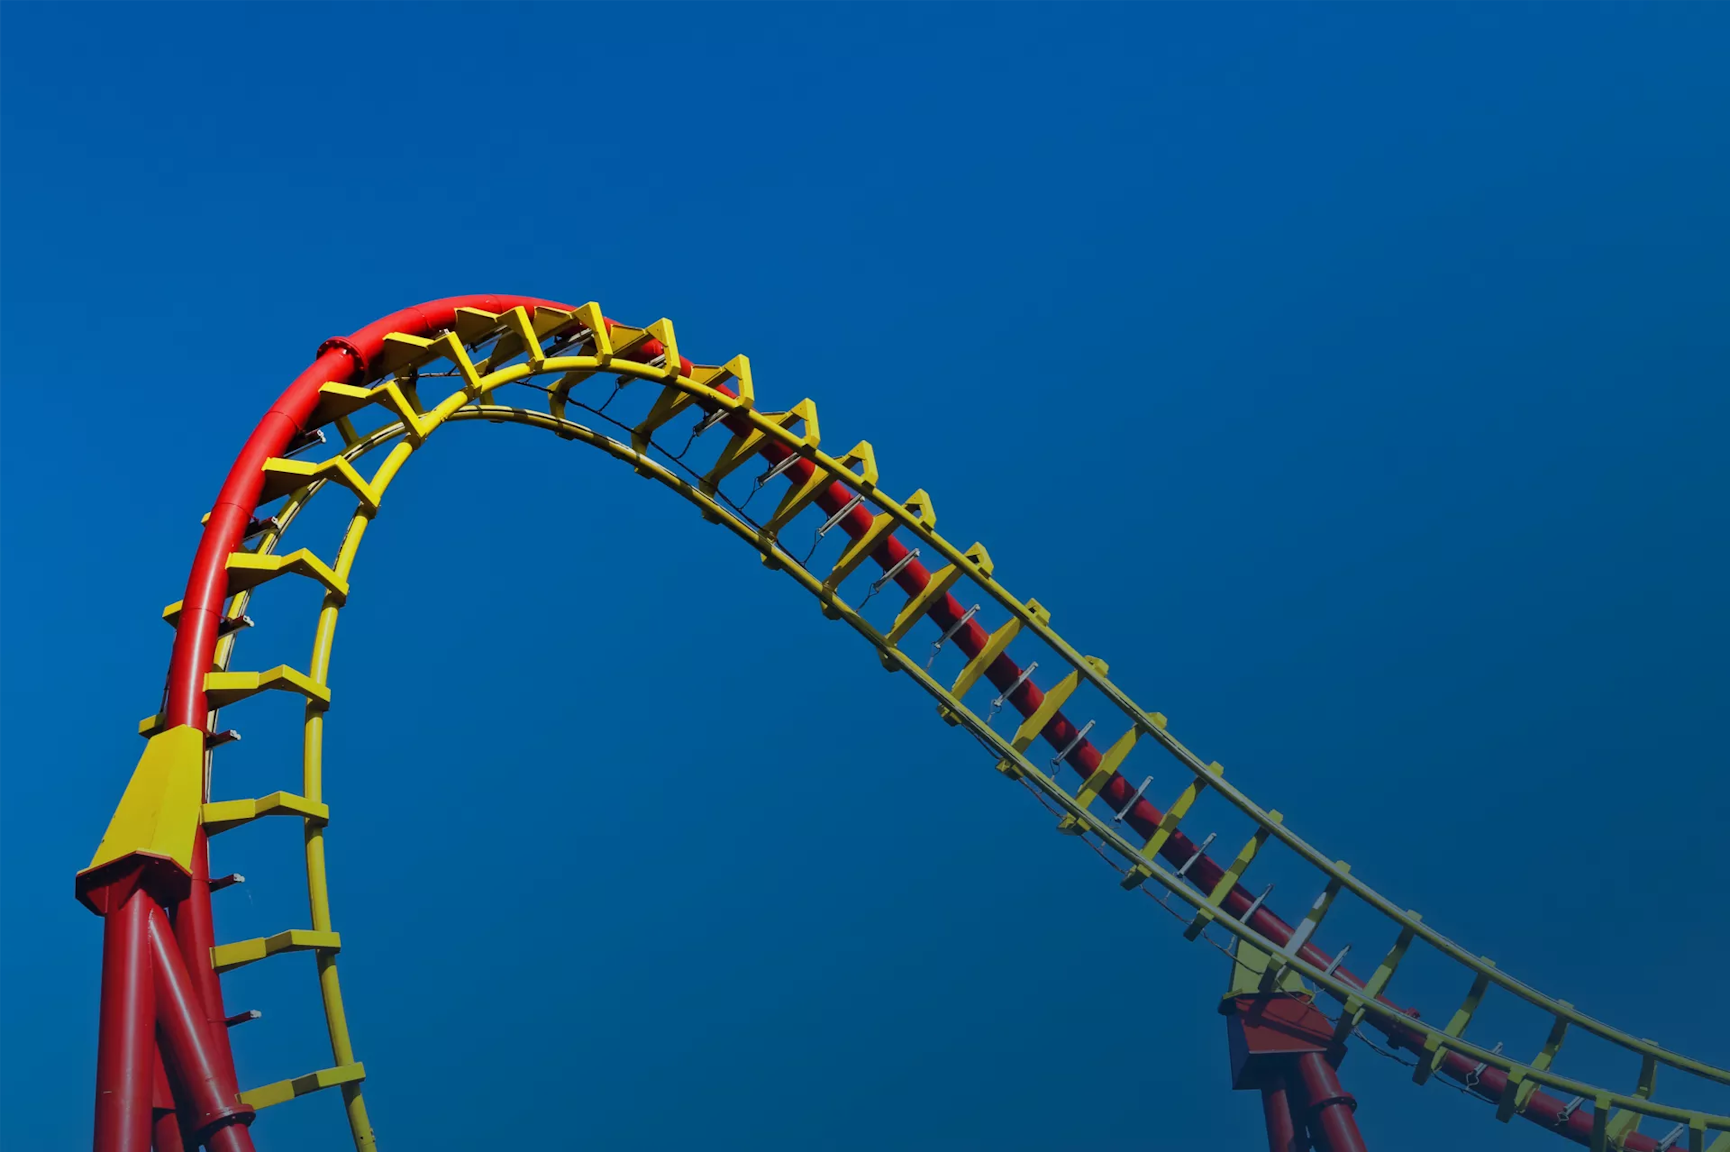 A section of a red and yellow roller coaster 